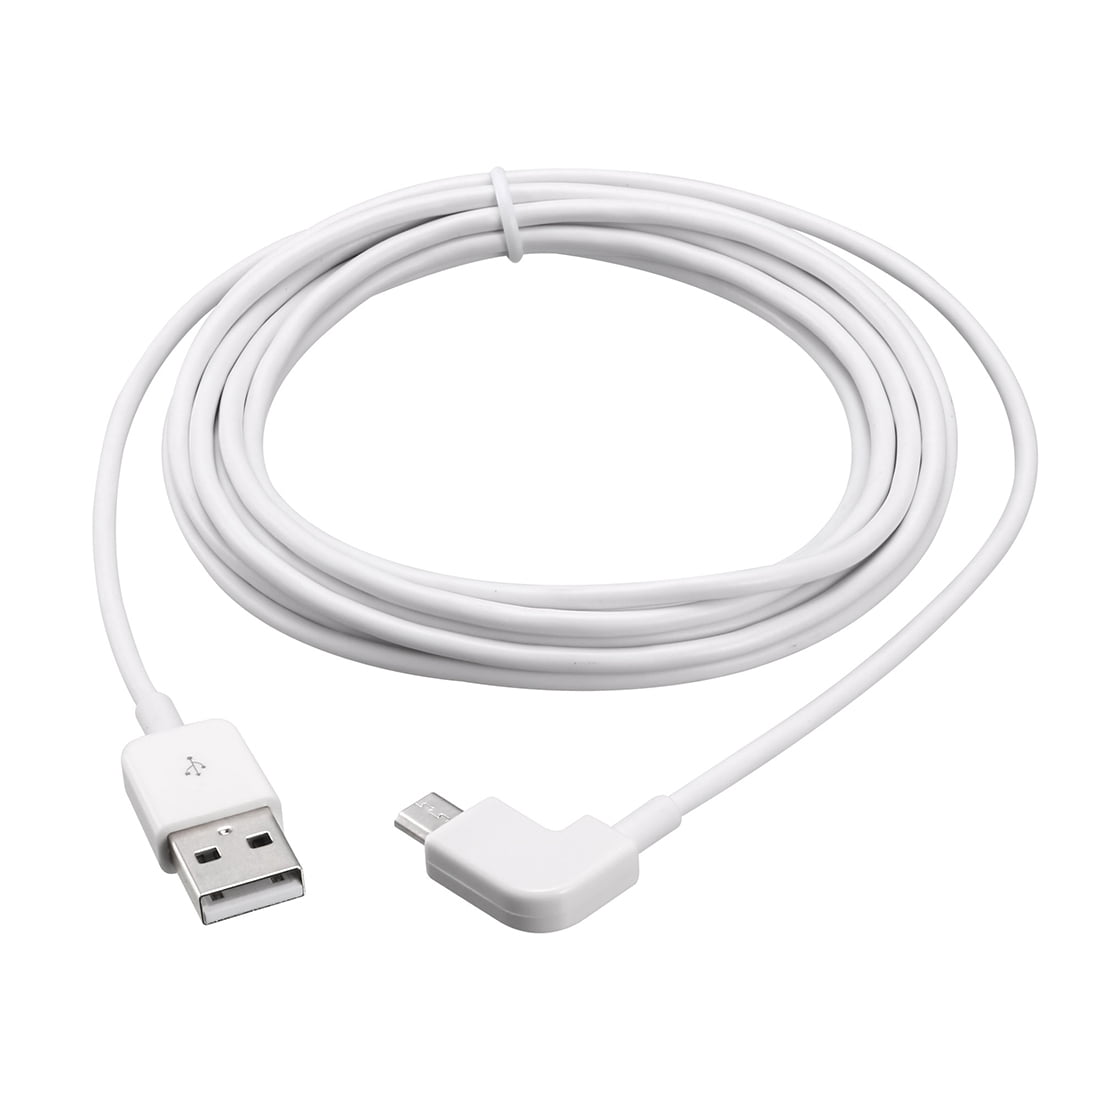 10FT USB 2.0 A Male M to Male Double Male Data Transfer Charger Cable Cord 